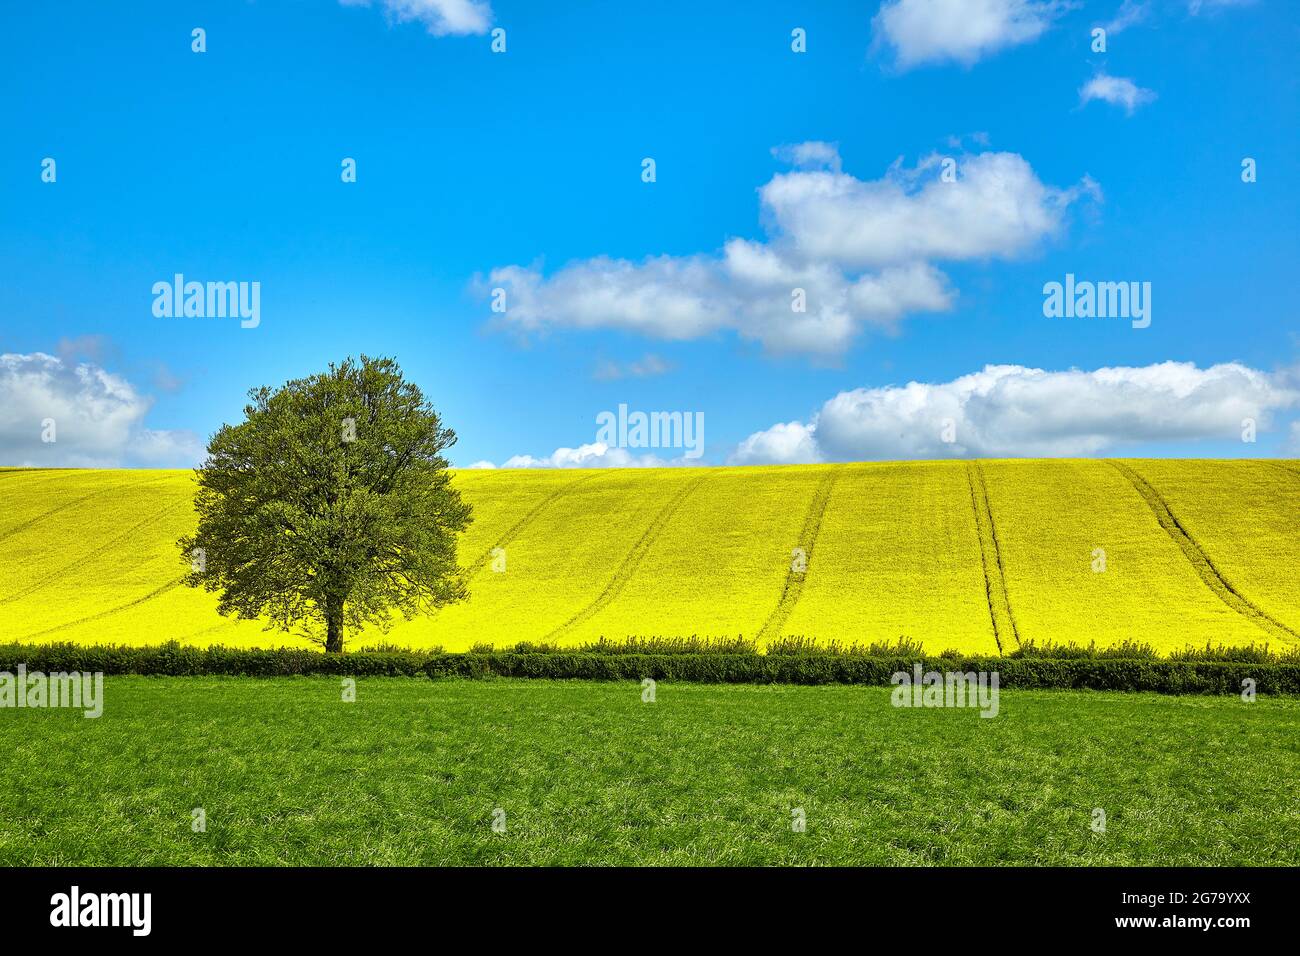 Summertime horizon with fields of rapeseed, grass and a tree Stock Photo